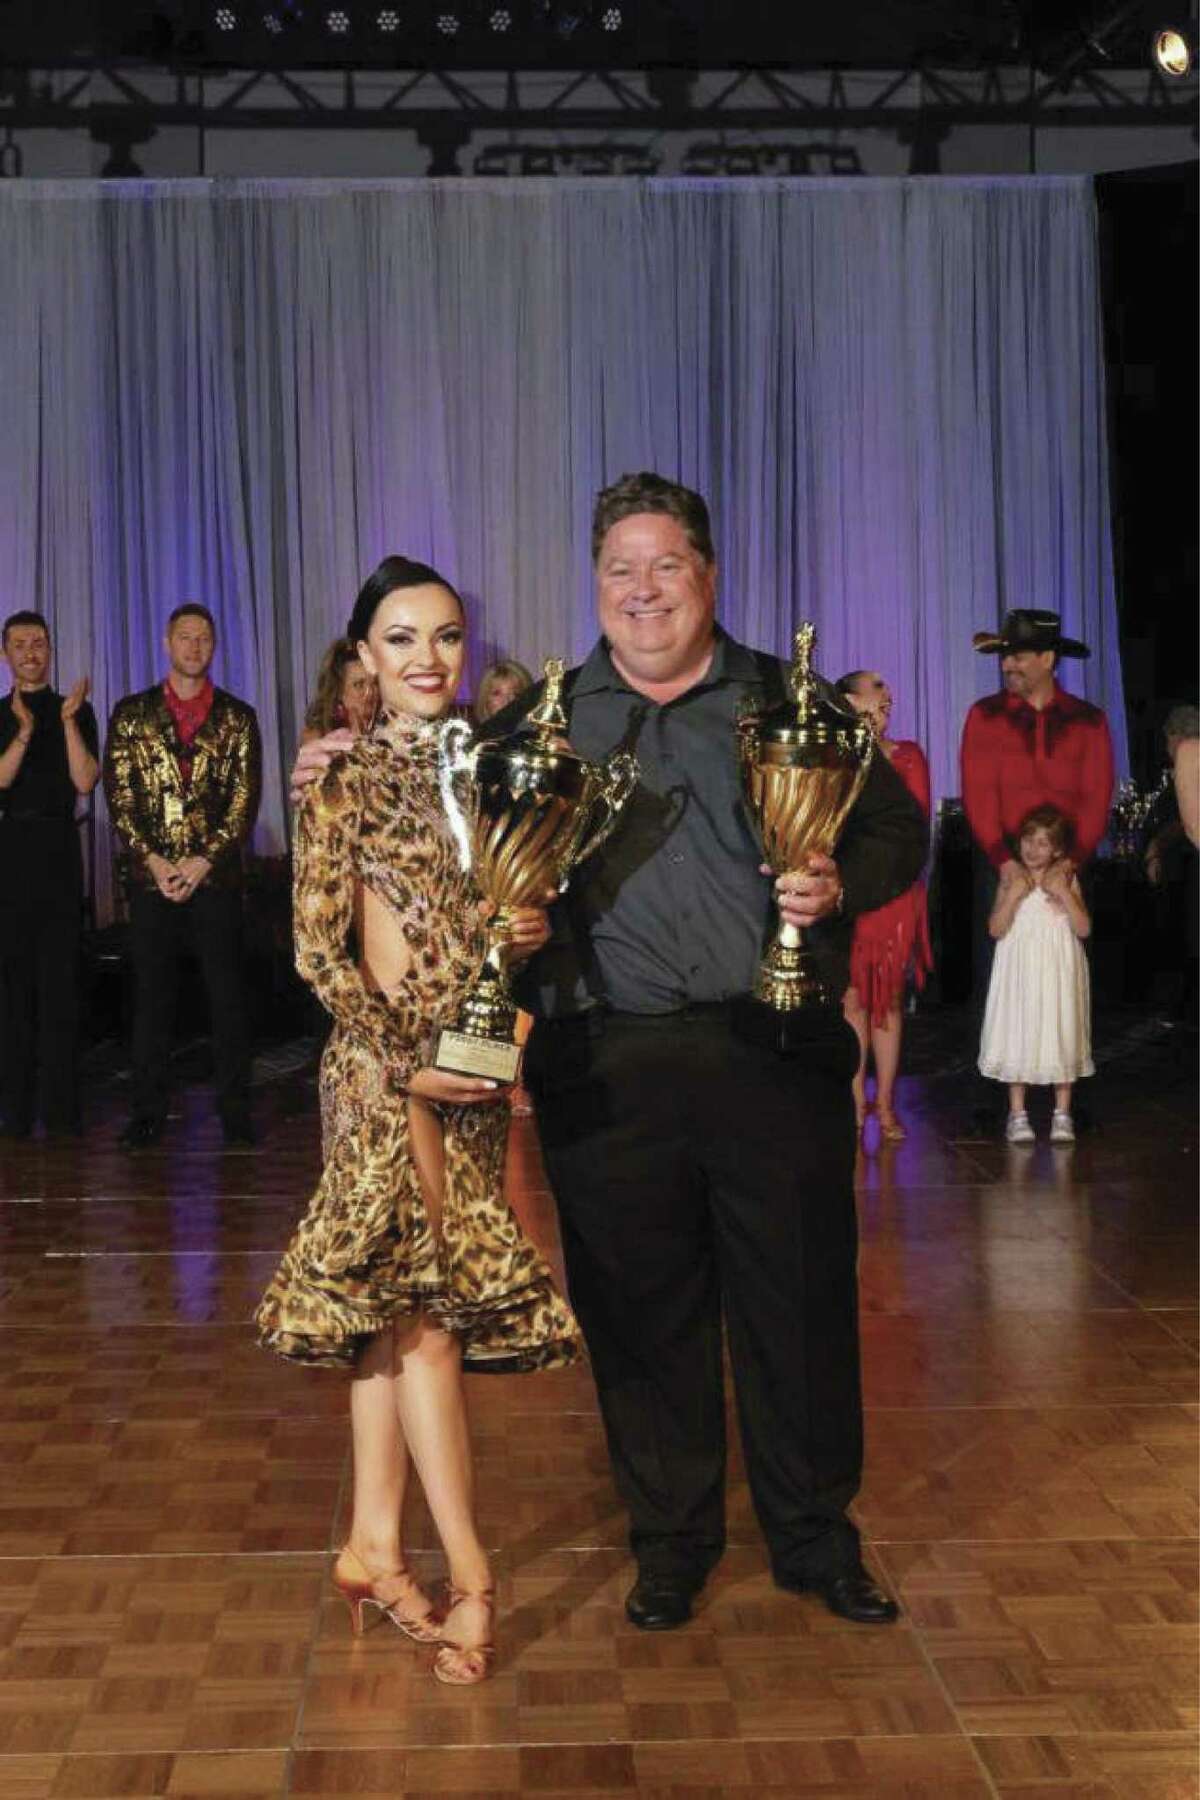 First Place Overall Winners of the 2019 YMCA Dancing with The Woodlands Stars were Tom Pisula and dance partner AnnaKalinichenko.